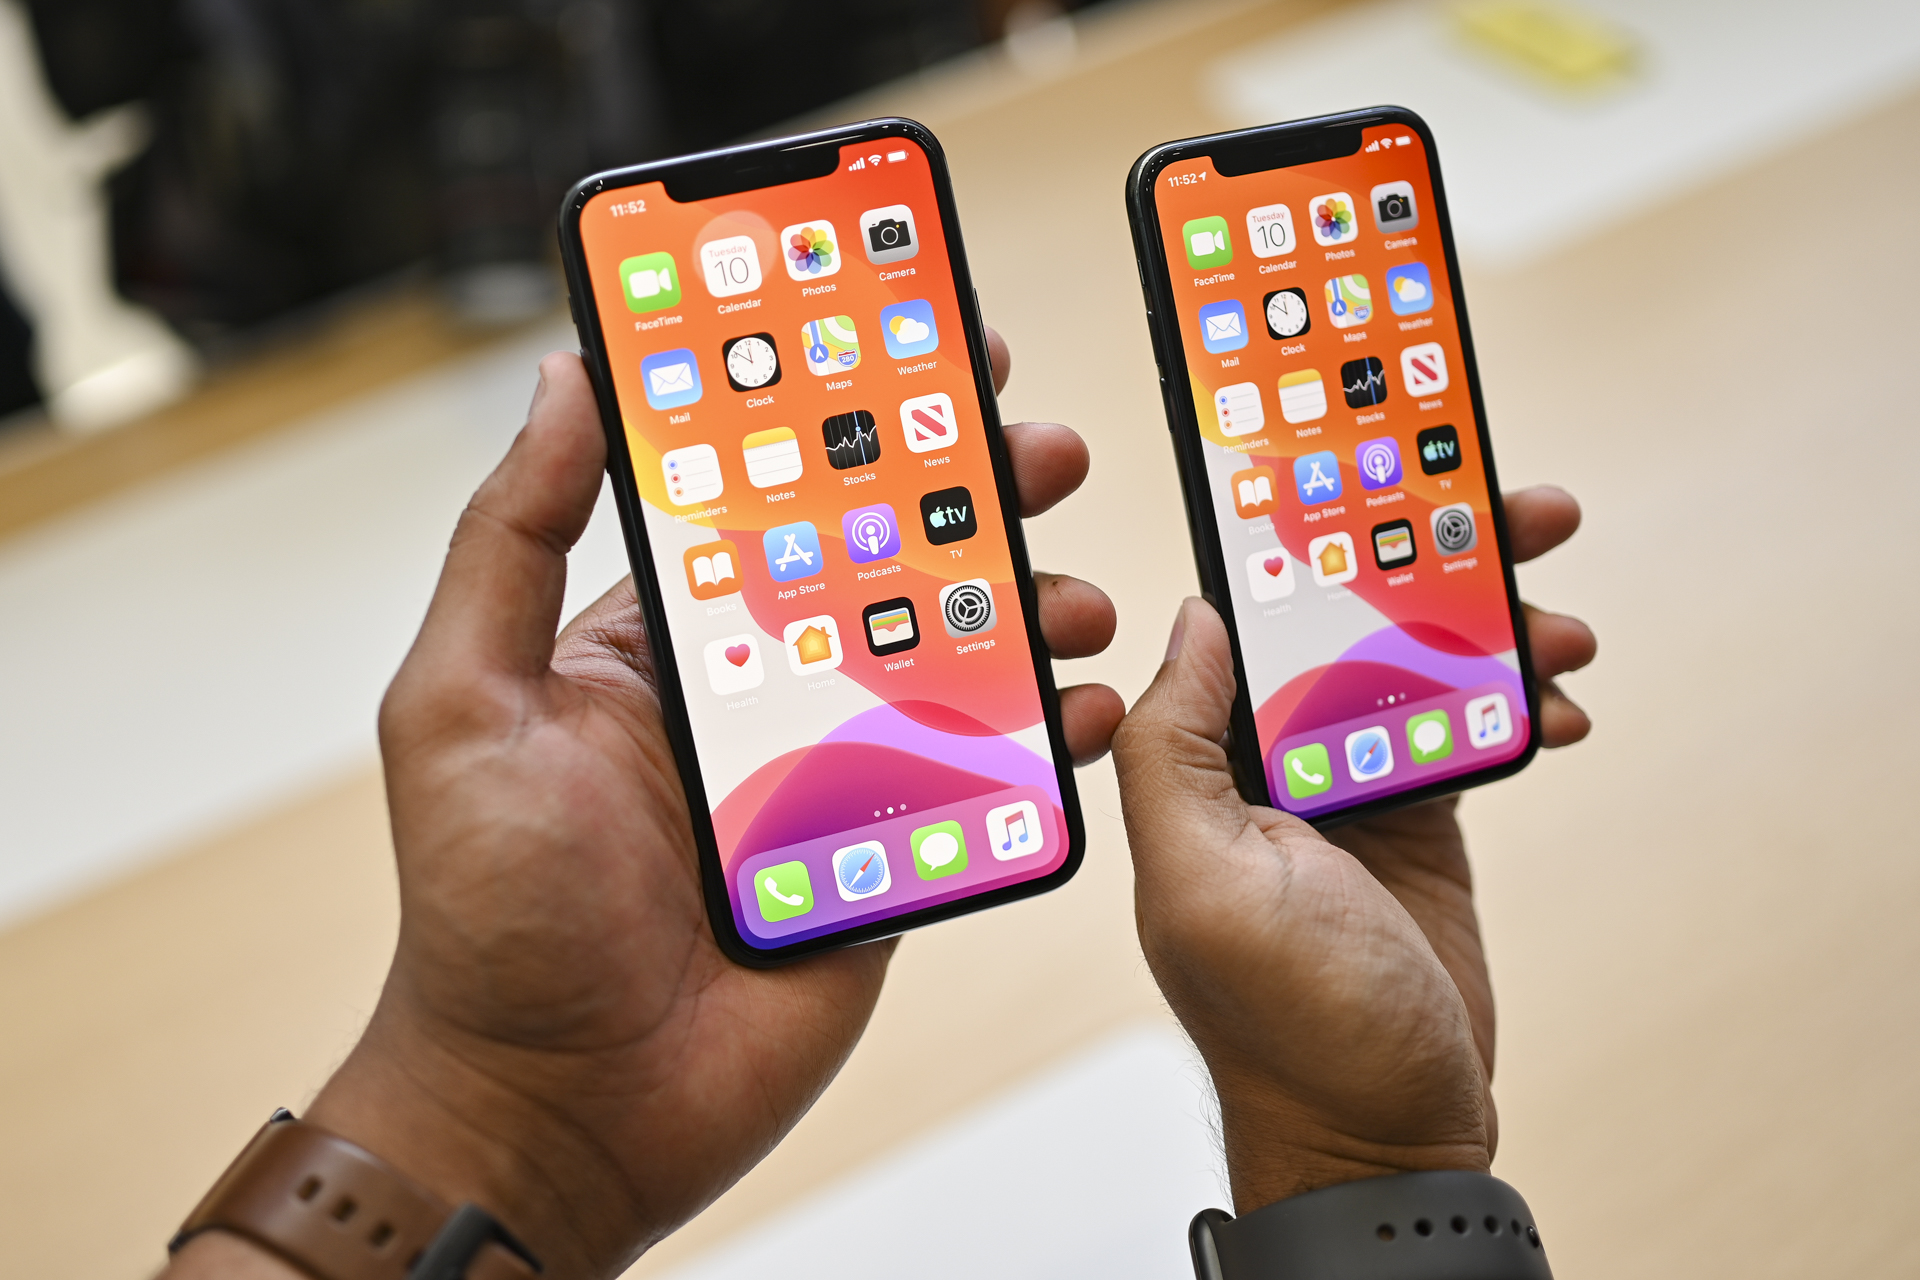 Apple iPhone 11 Pro Max hands-on comparison with Pro